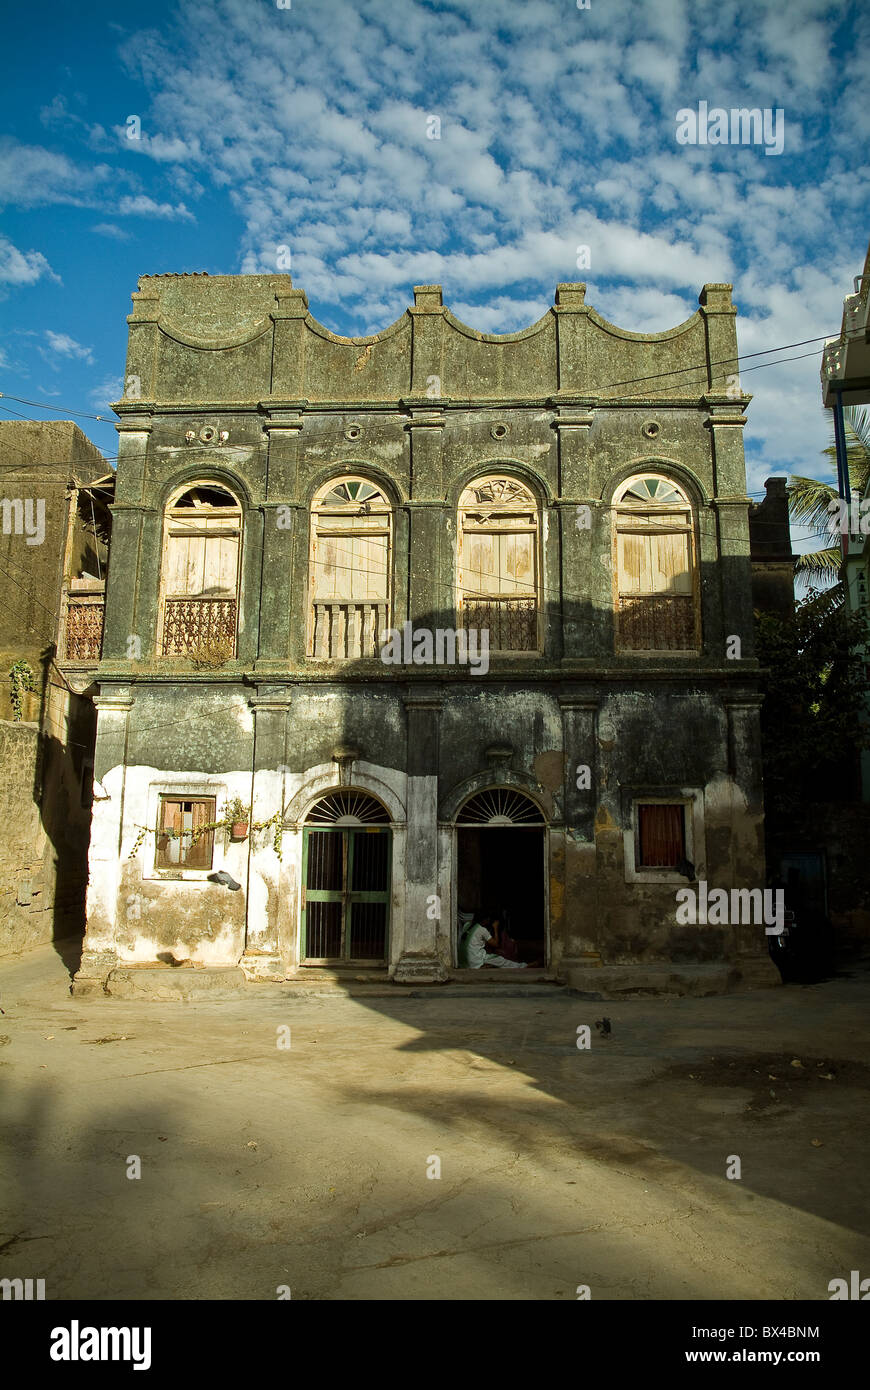 Old Portuguese colonial building front on the Island of Diu, India Stock Photo